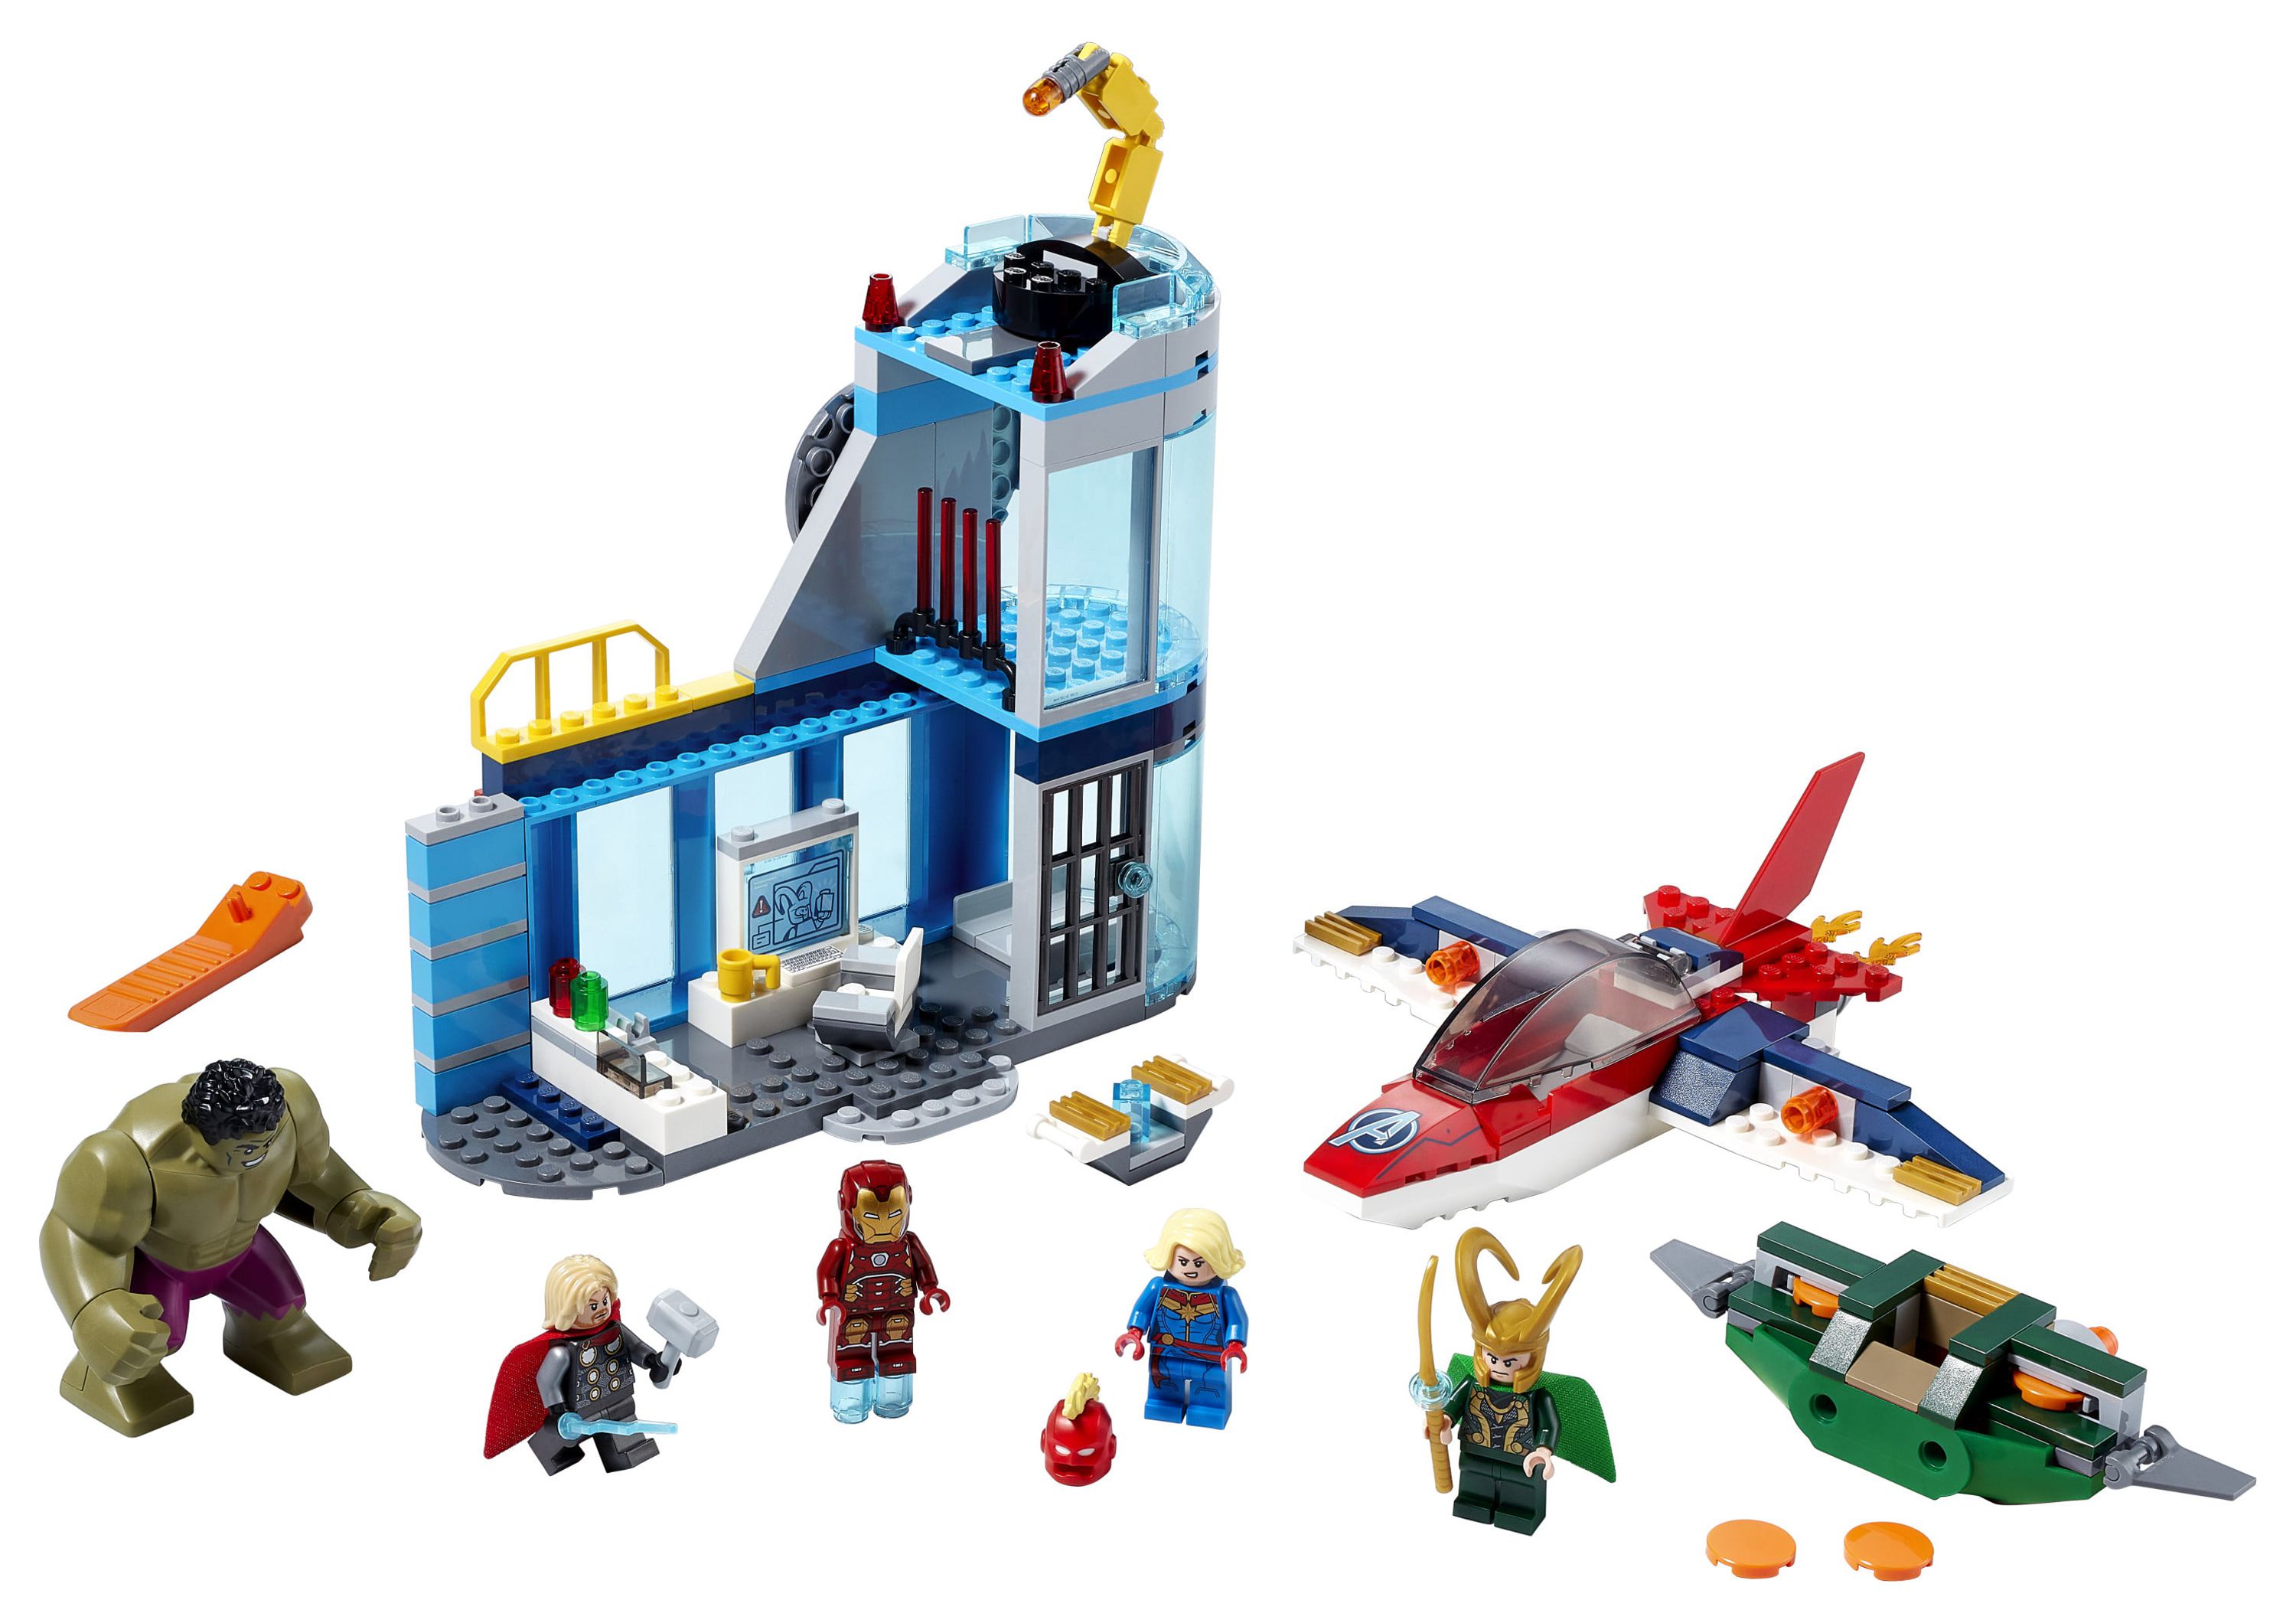 LEGO Marvel Avengers Wrath of Loki 76152 Cool Building Toy with Marvel Avengers Minifigures (223 Pieces) - image 3 of 8